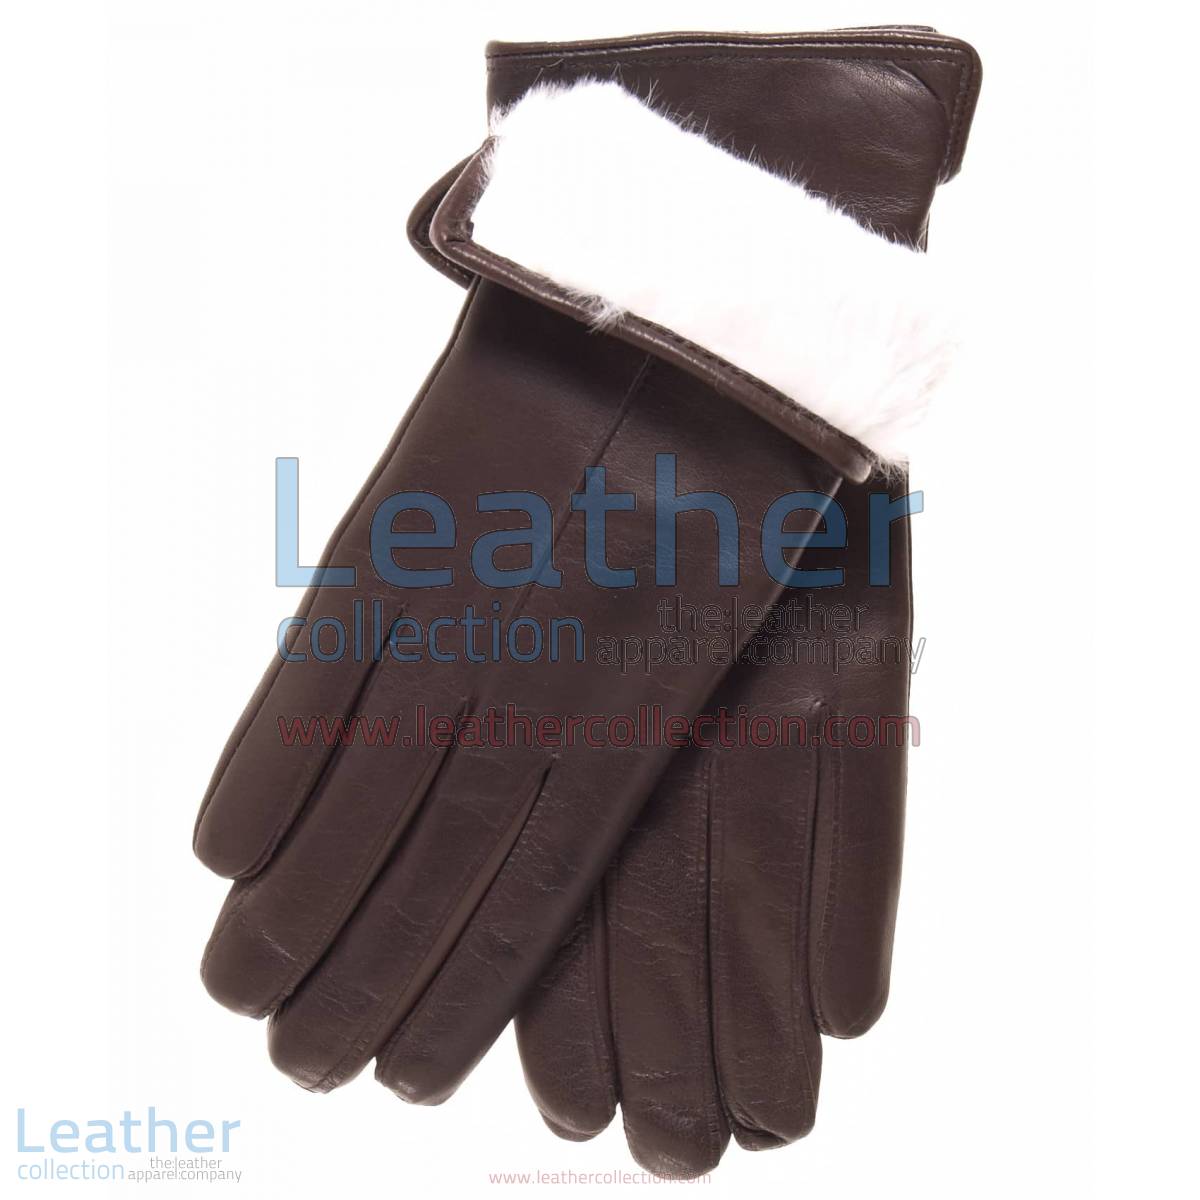 White Fur Lined Brown Leather Gloves | white fur lined gloves